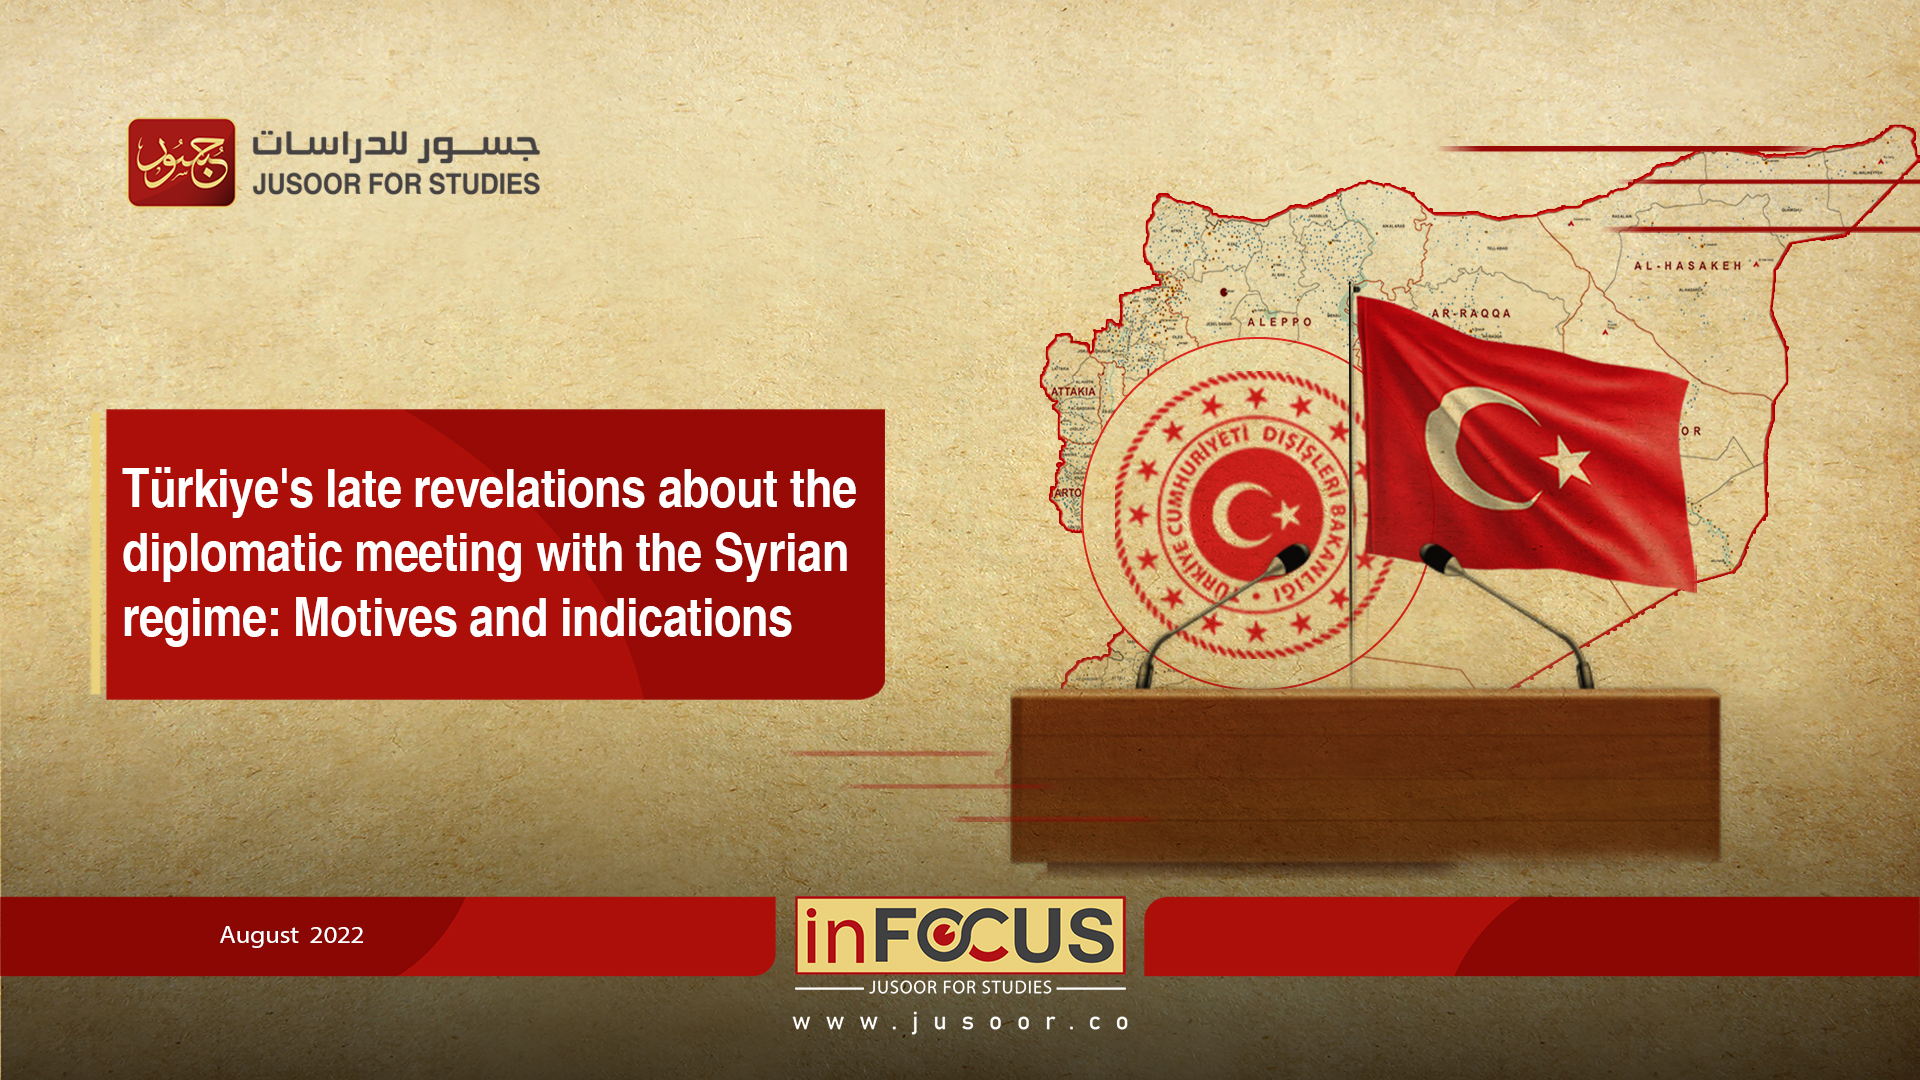 Türkiye's late revelations about the diplomatic meeting with the Syrian regime: Motives and indications